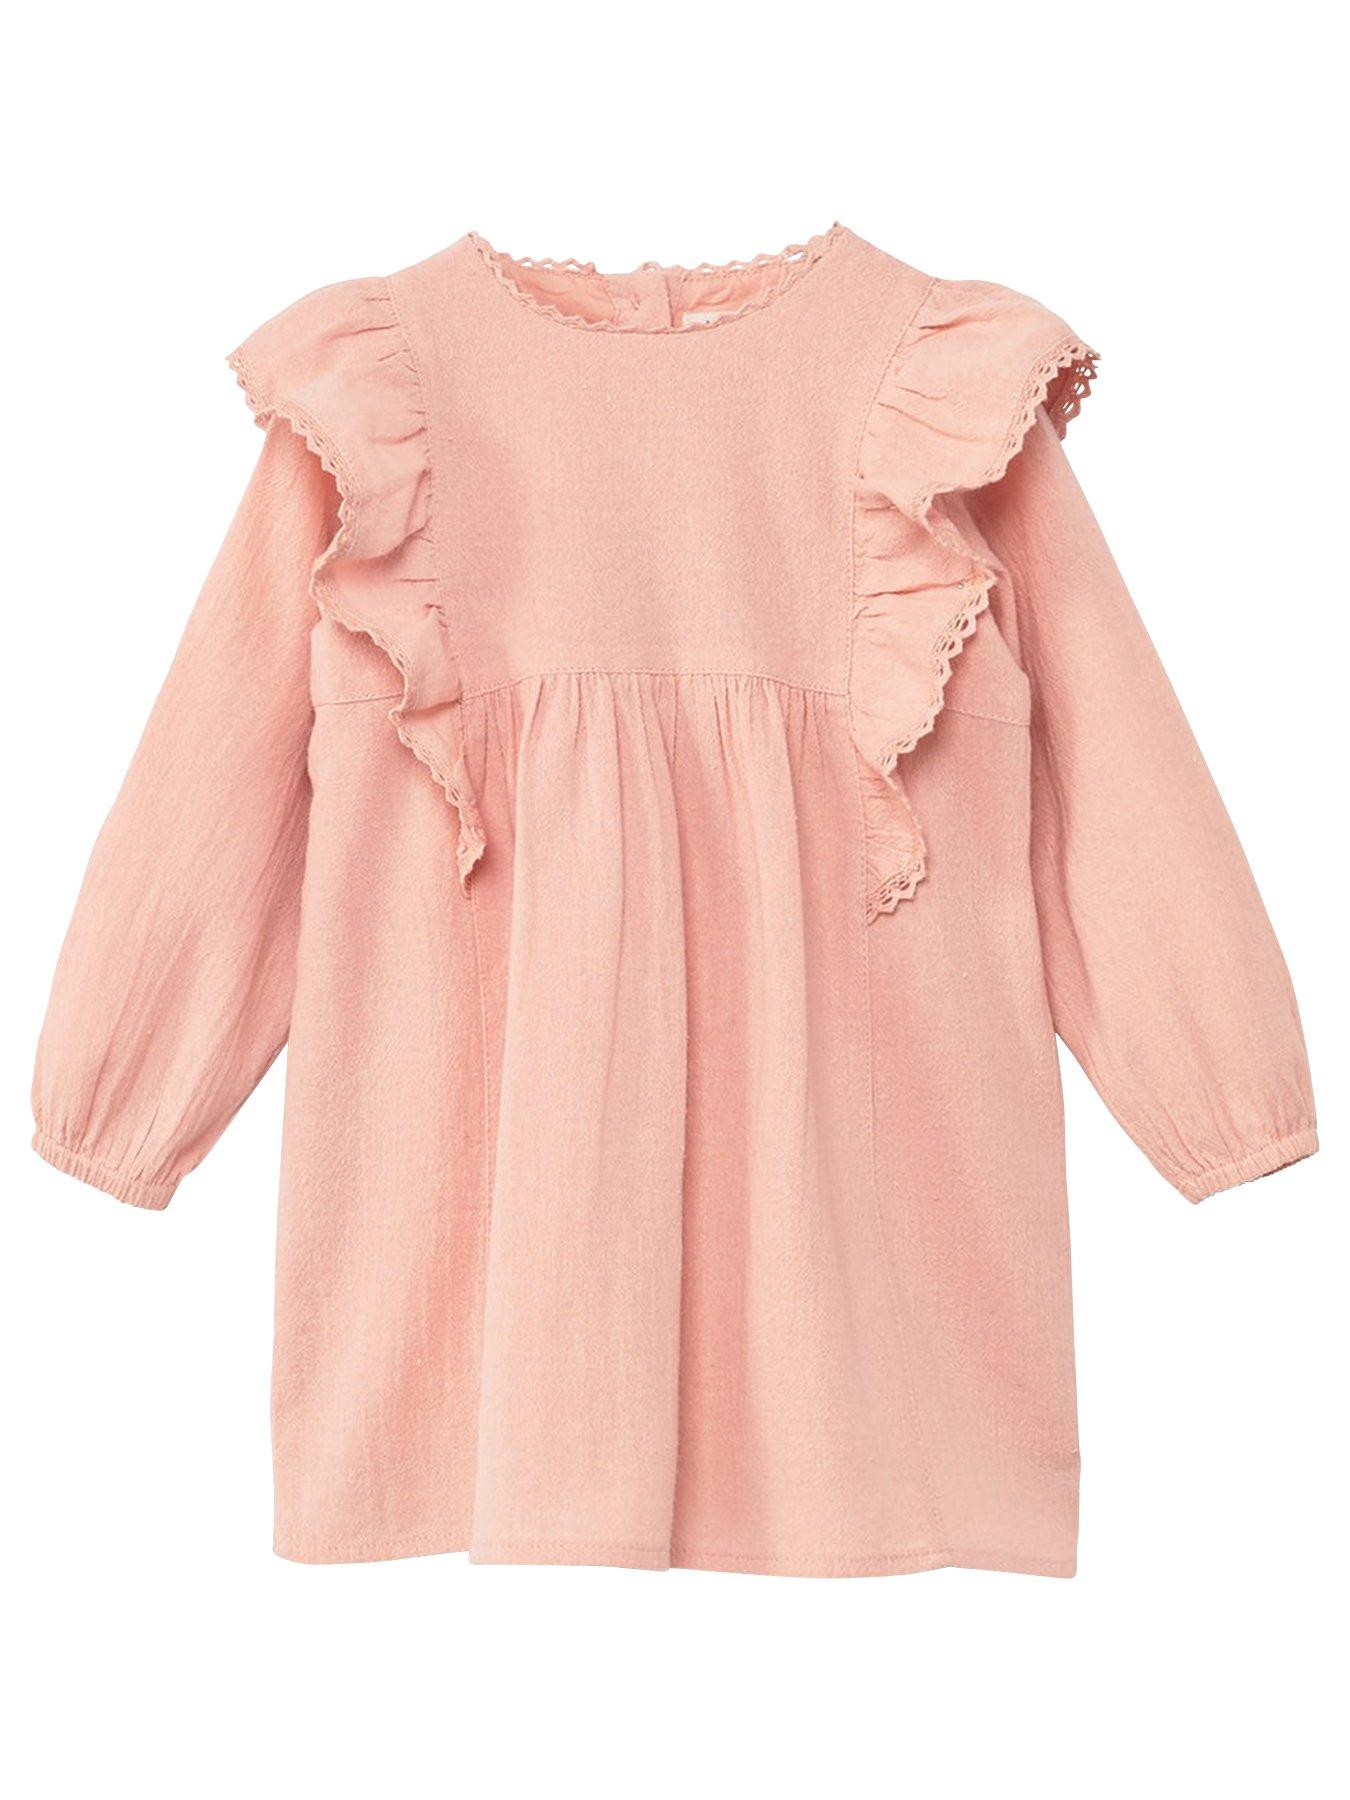 Dresses | Baby clothes | Child & baby | www.littlewoods.com